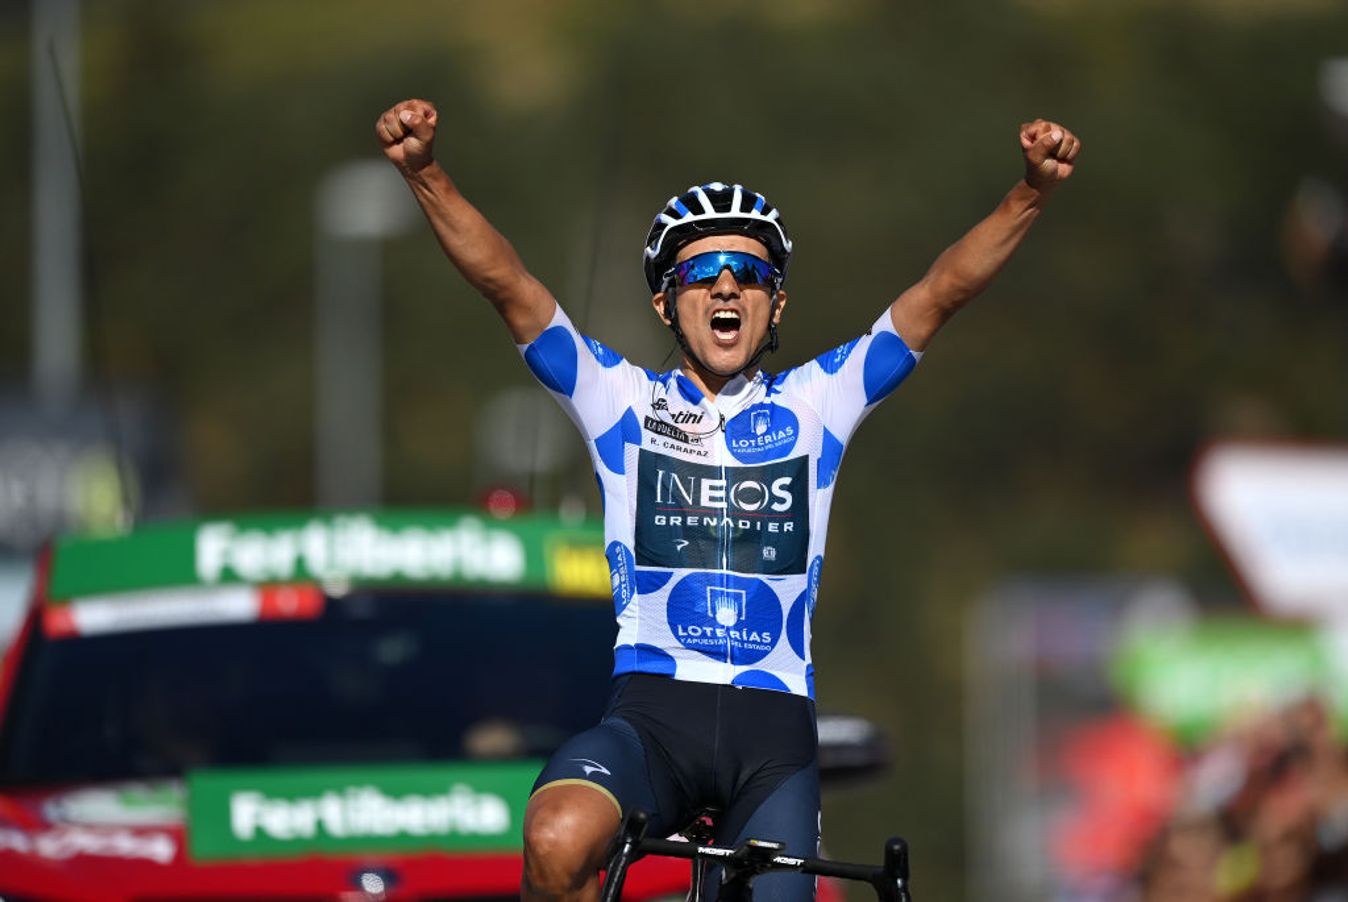 Richard Carapaz won two stages and the King of the Mountains jersey at the 2022 Vuelta